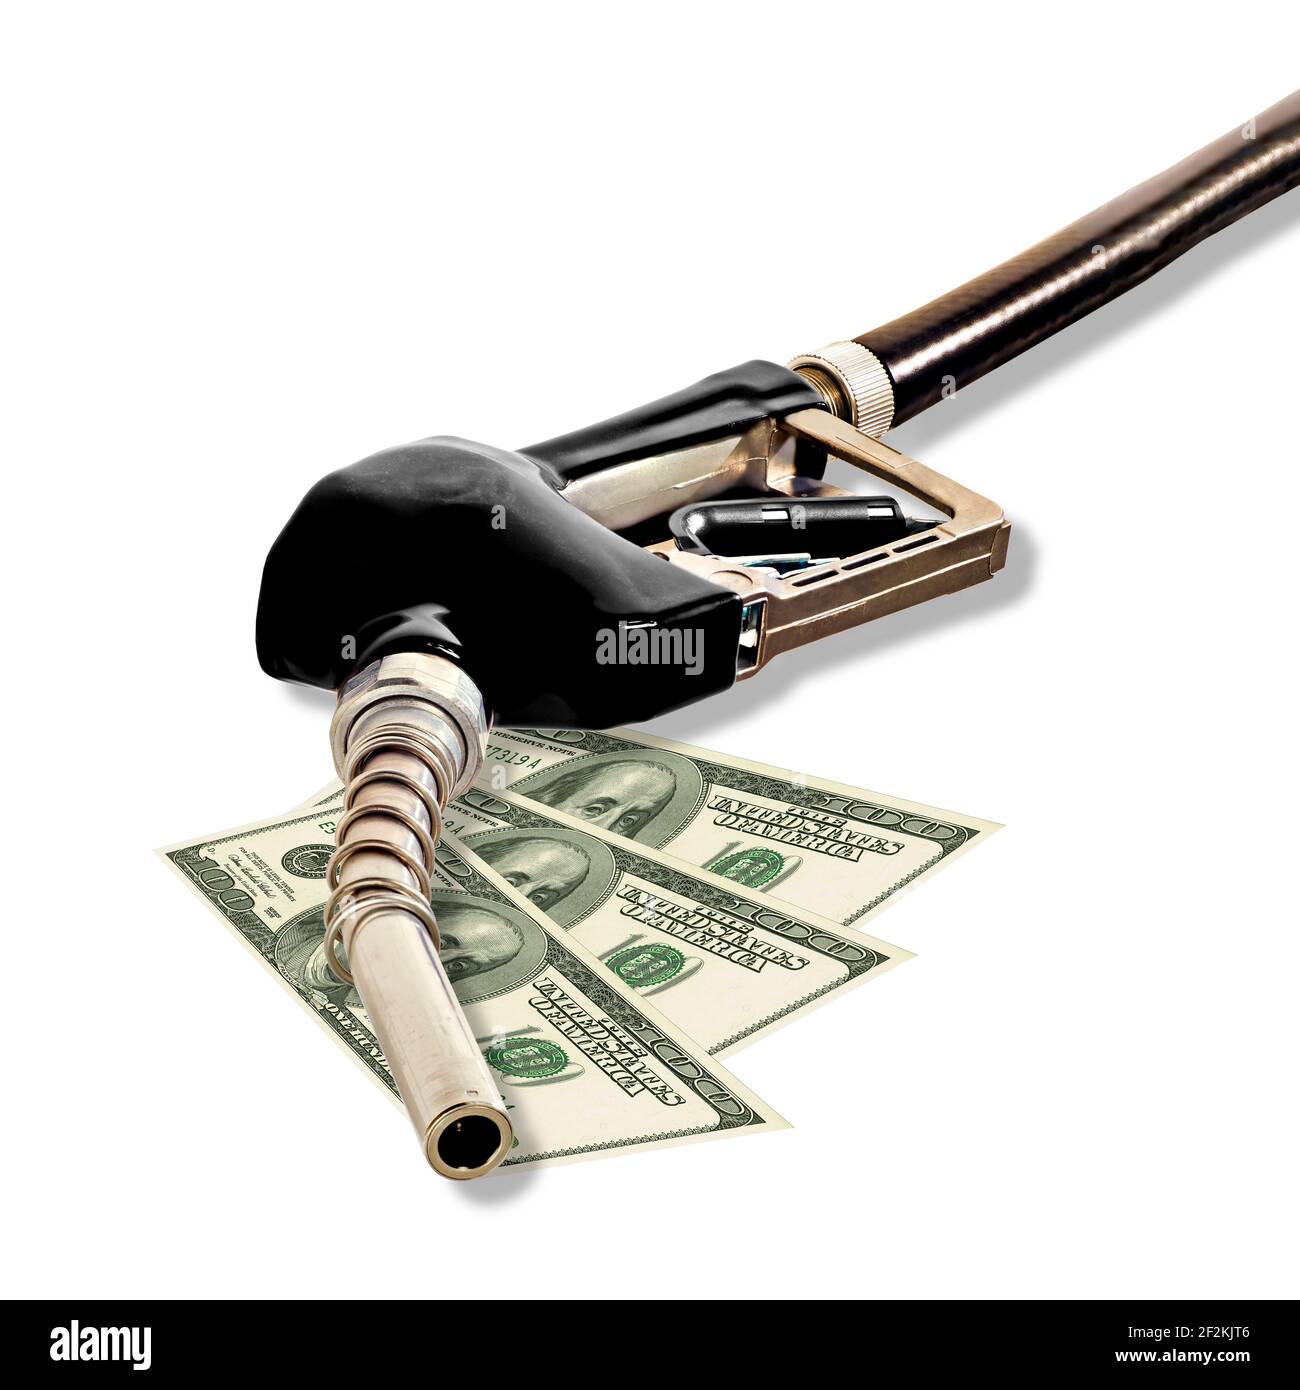 Vertical shot of a gasoline fuel nozzle laying on three fanned out 100 dollar bills on a white background.  Copy space. Stock Photo